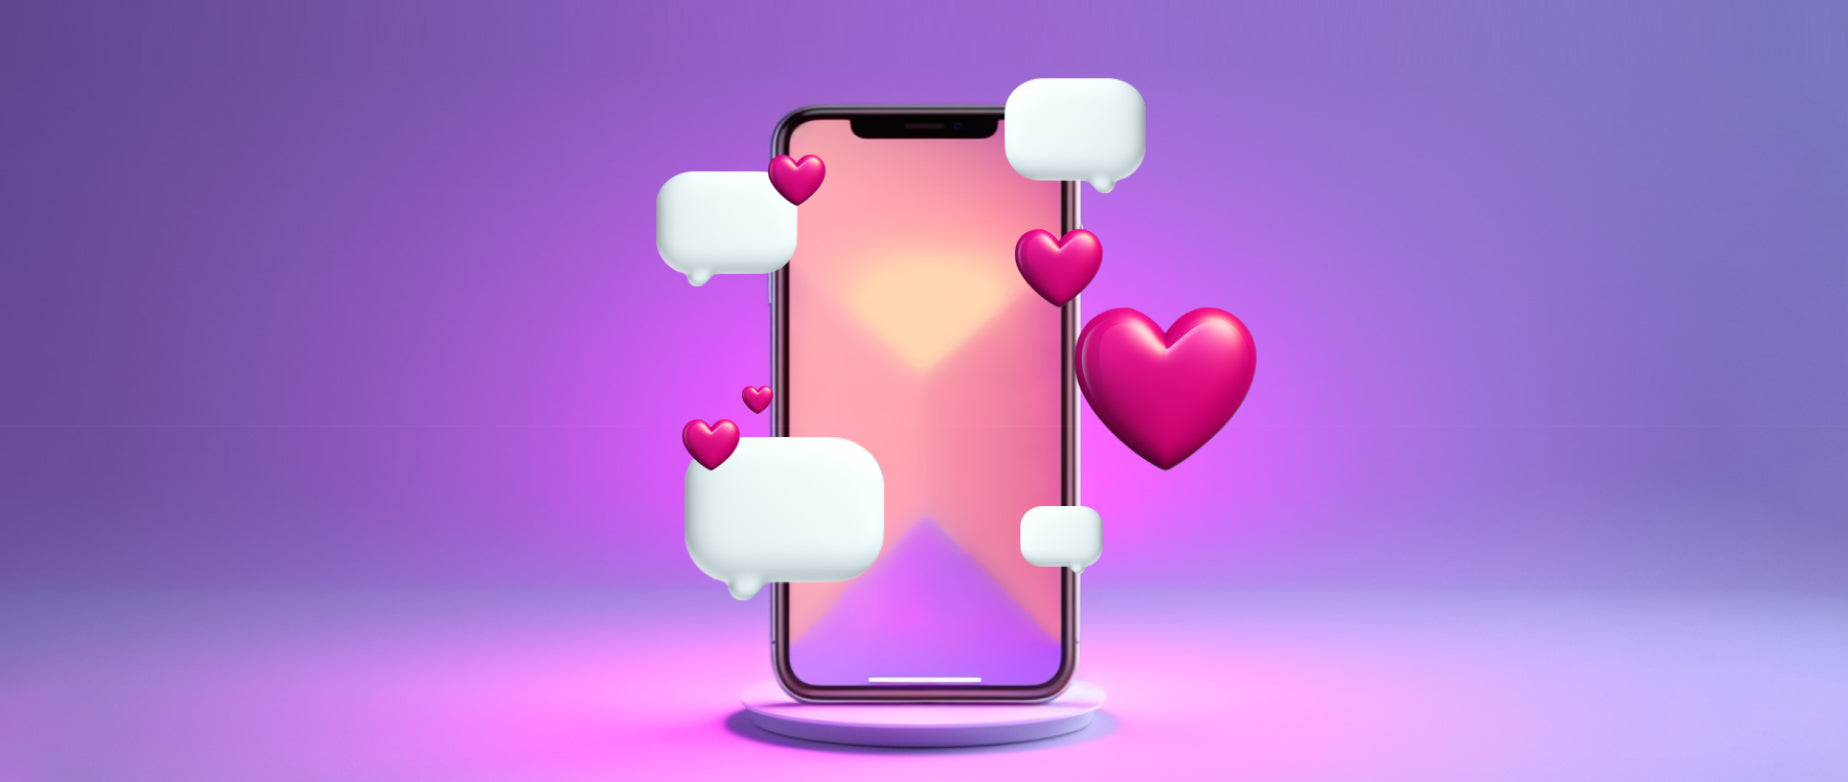 Illustration of a mobile phone with 3D bubbles and hearts floating around it